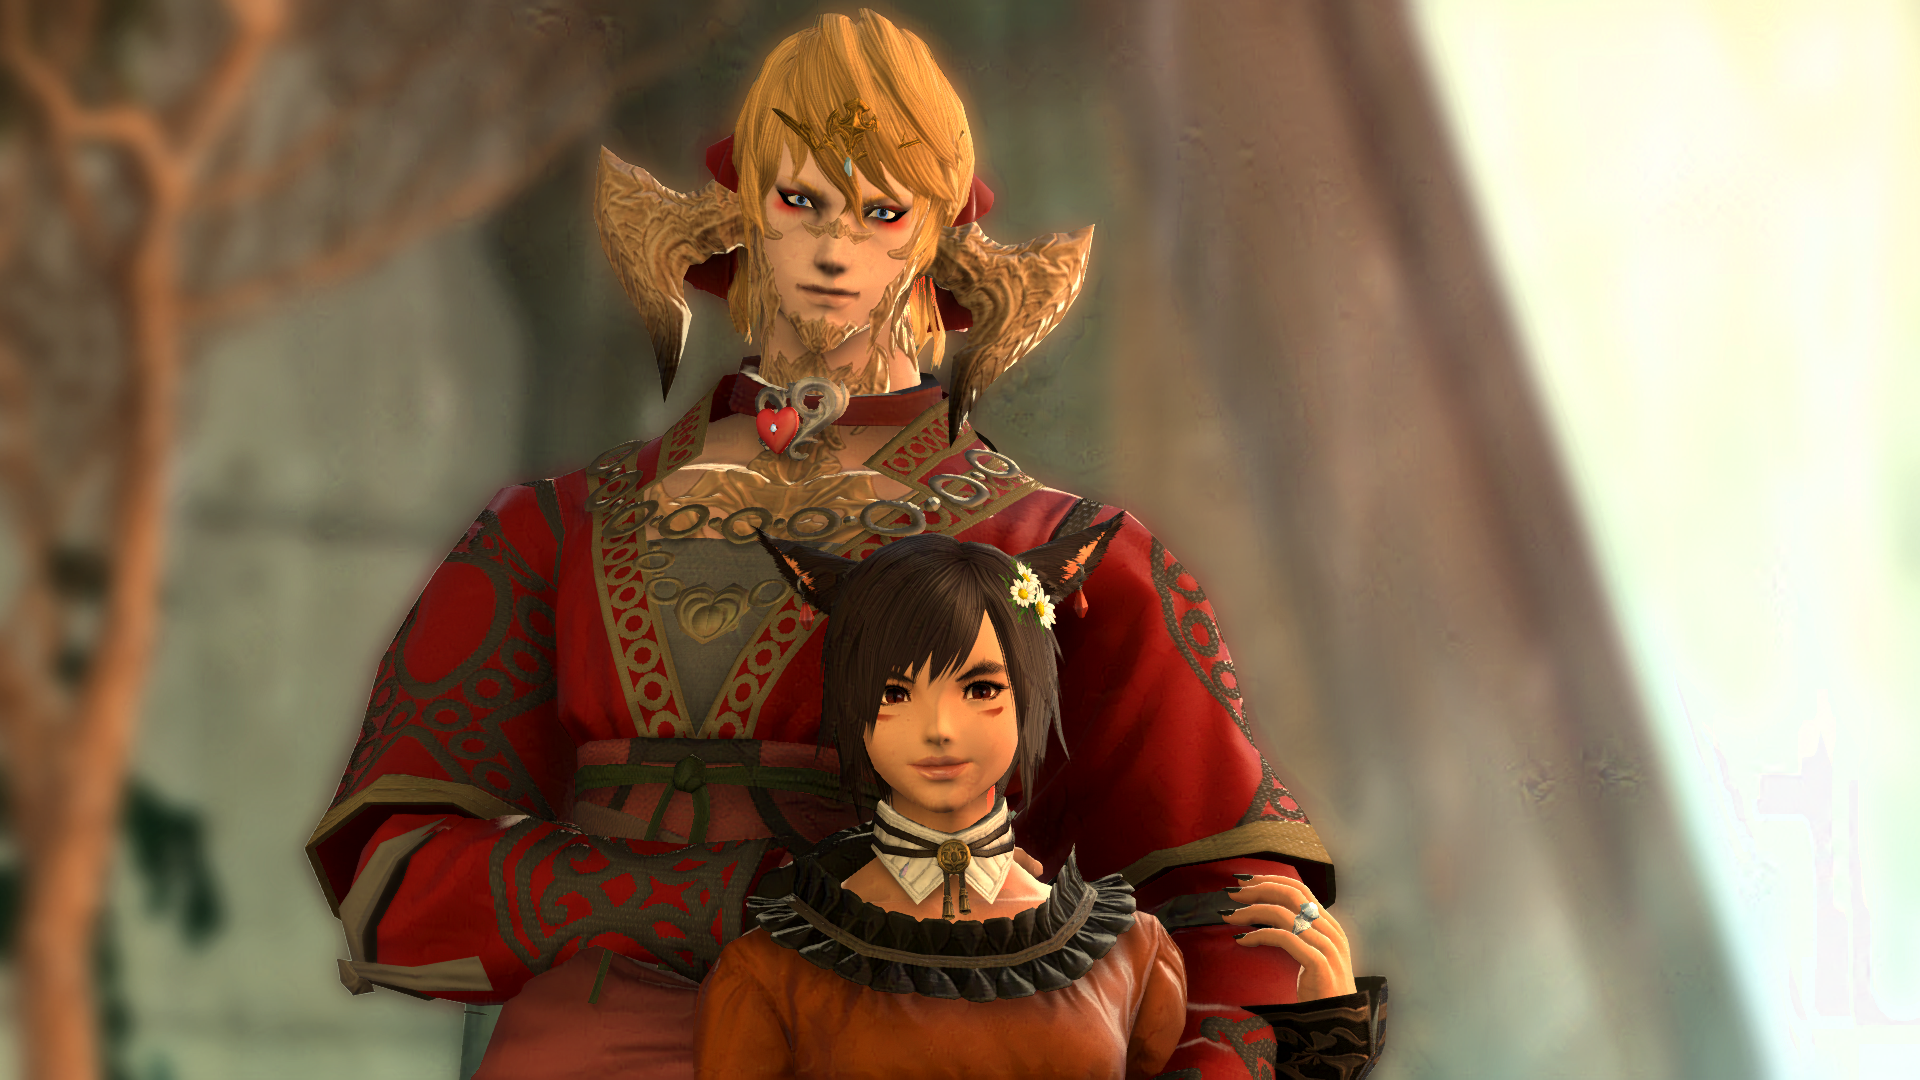 Valentine Xochitl, a Miqo'te of the Seeker of the Sun clan, is being embraced by Daisy Xochitl, an Aura of the Raen clan. Both women are looking at the viewer with a smile.